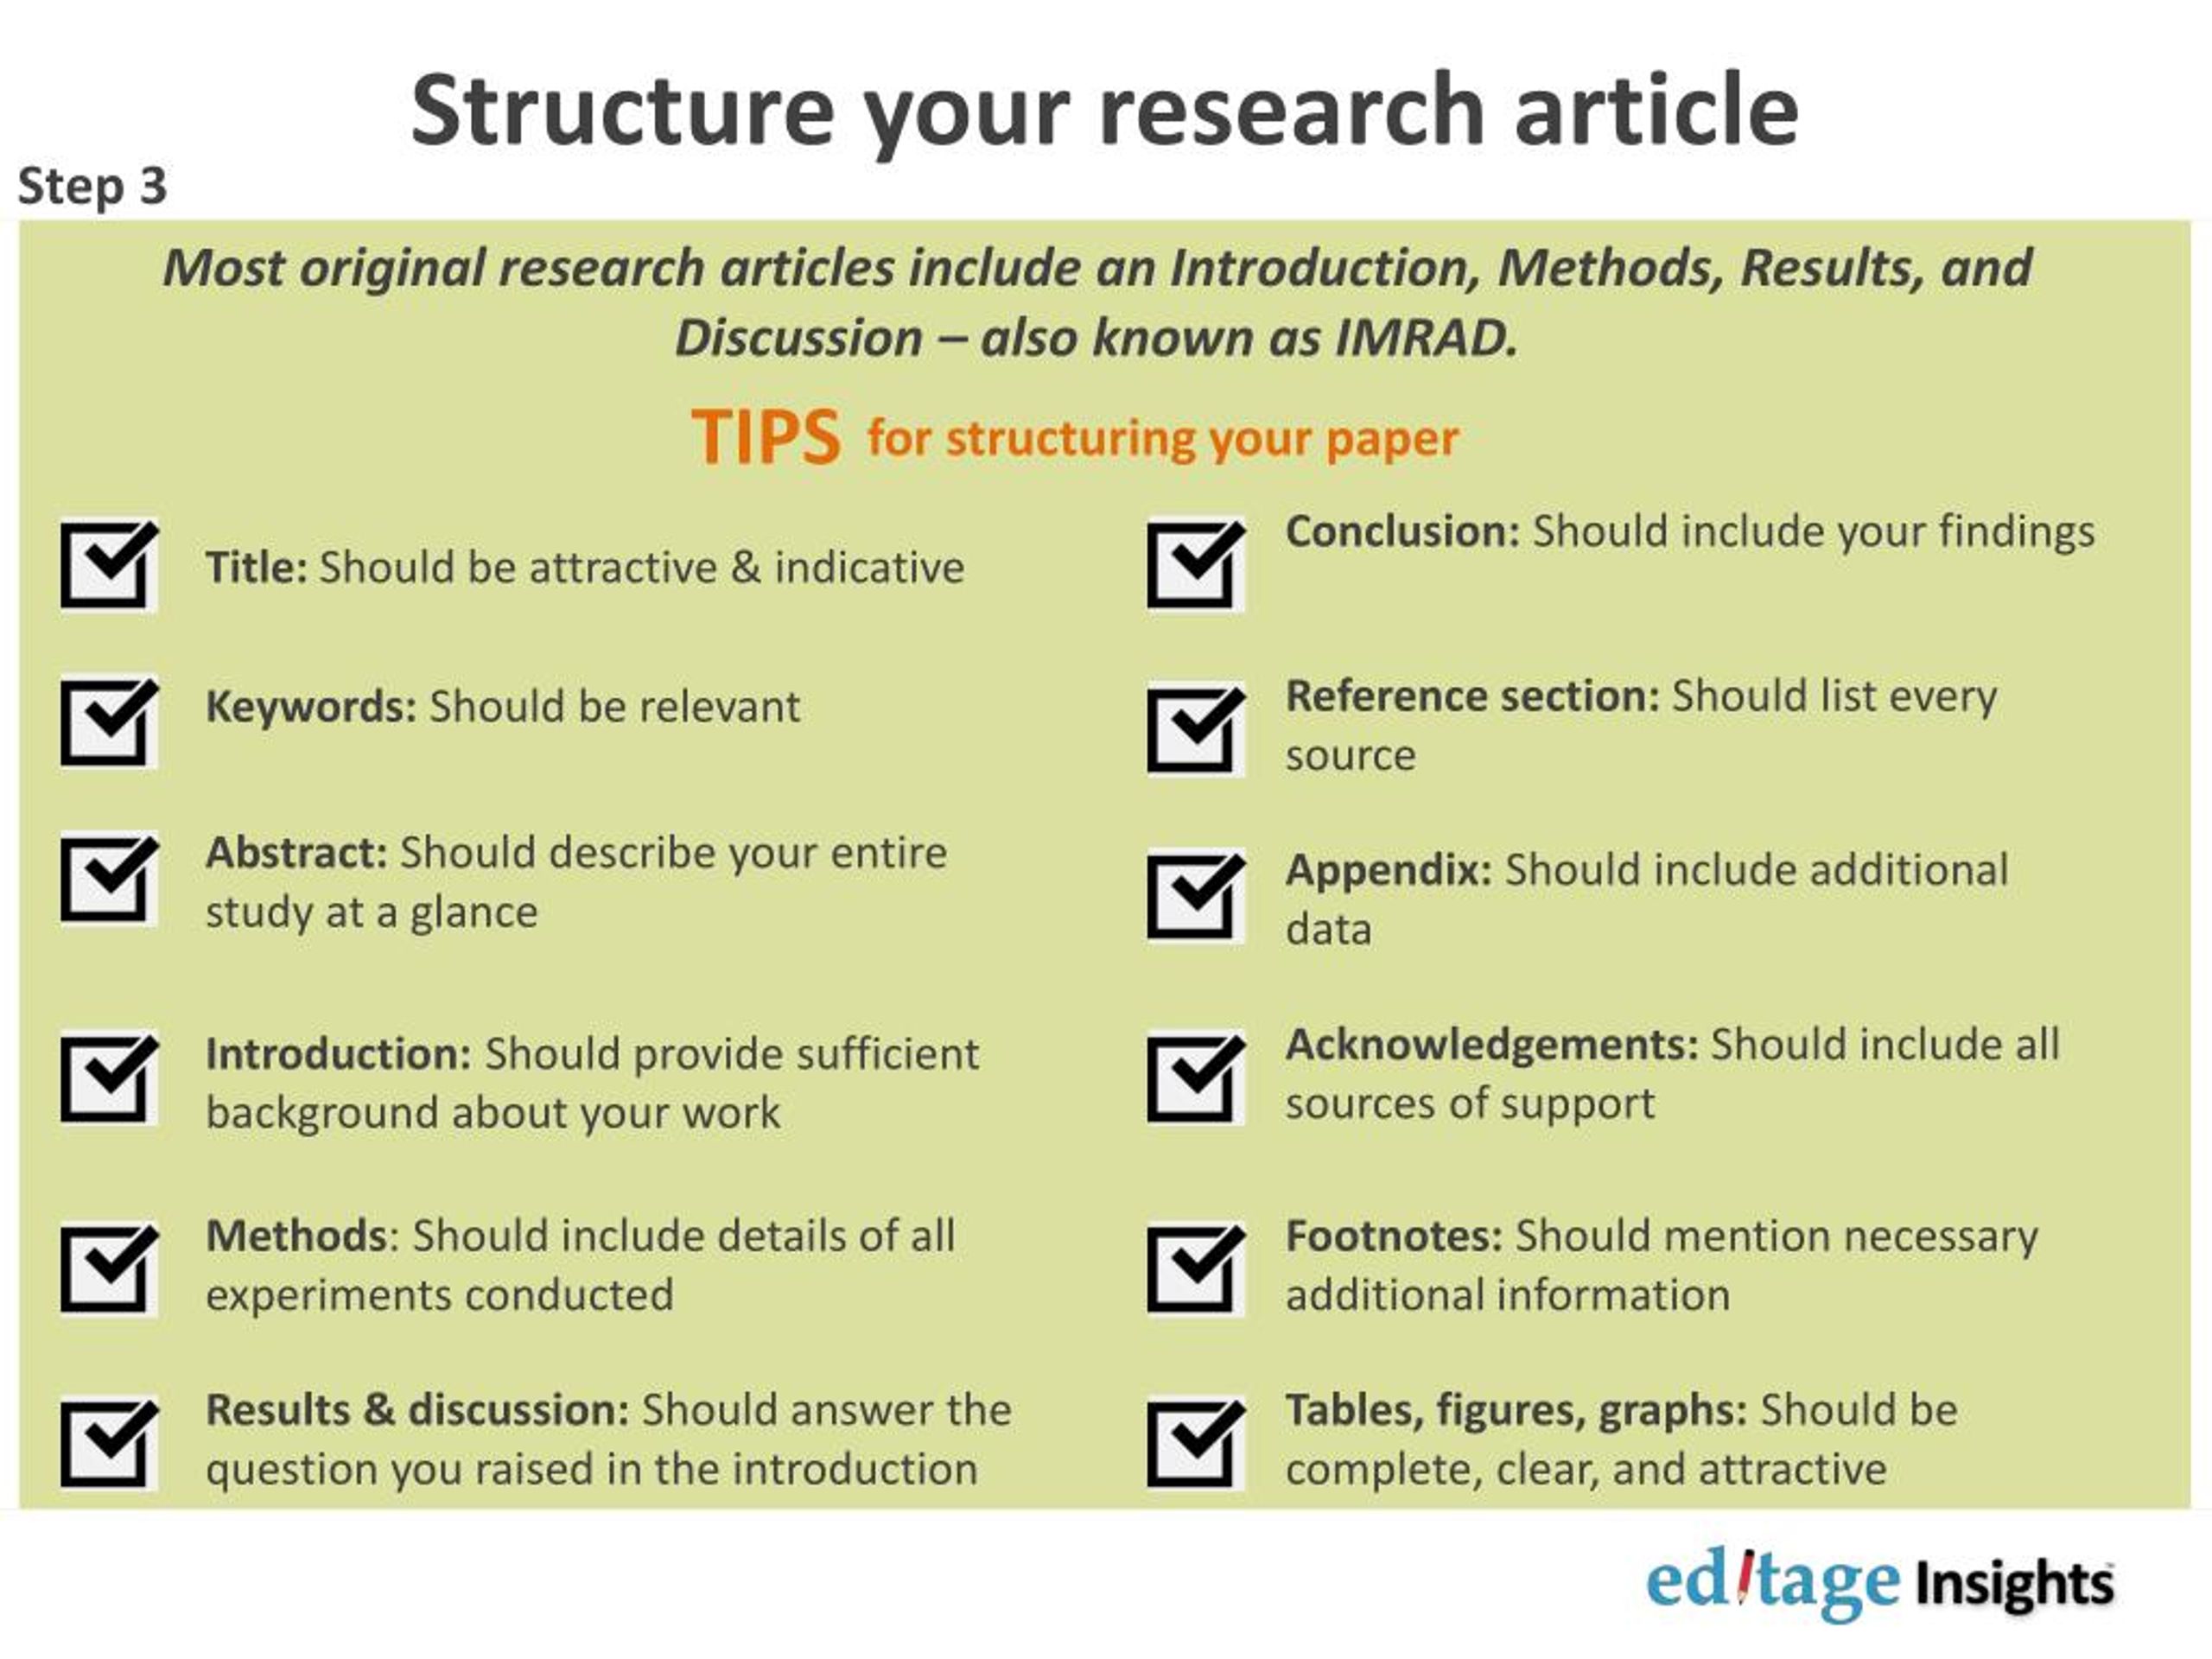 preparation of research article